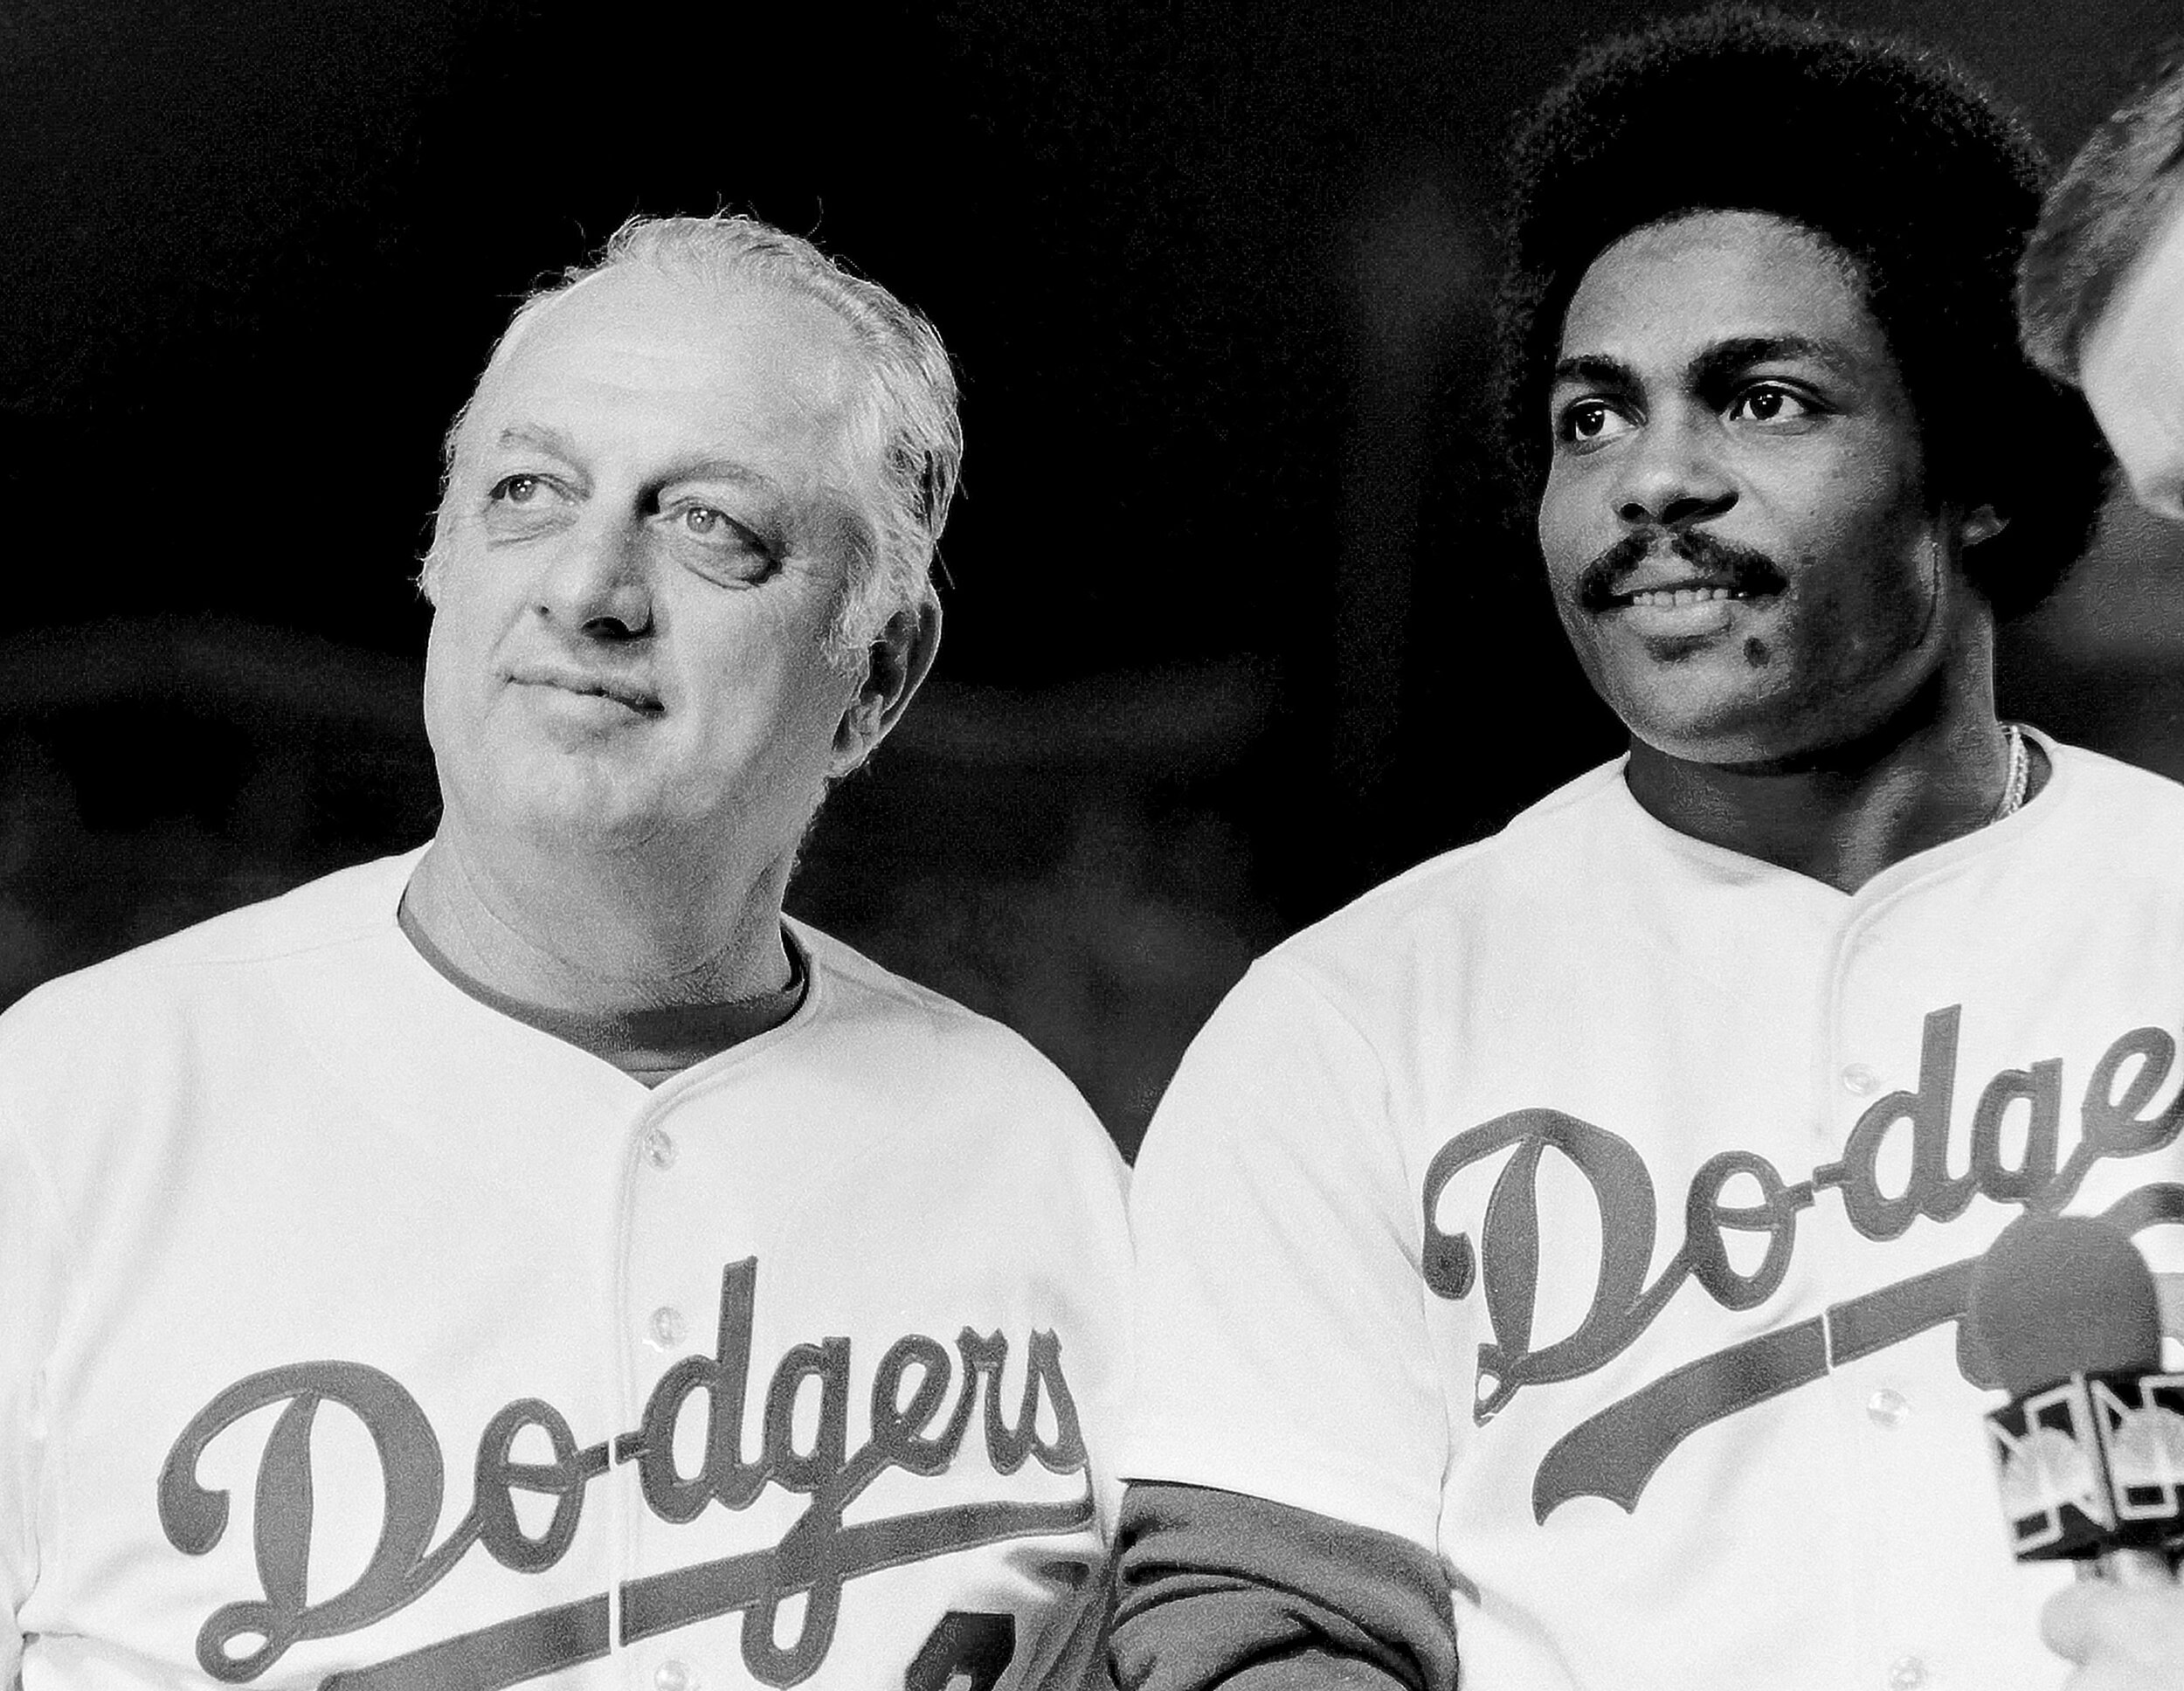  LOS ANGELES, CA - OCTOBER 10, 1981: Manager Tommy Lasorda and Pedro Guerrero #28 of the Los Angeles Dodgers are interviewed after defeating the Houston Astros during the 1981 National League Division Series at Dodger Stadium, Los Angeles, California